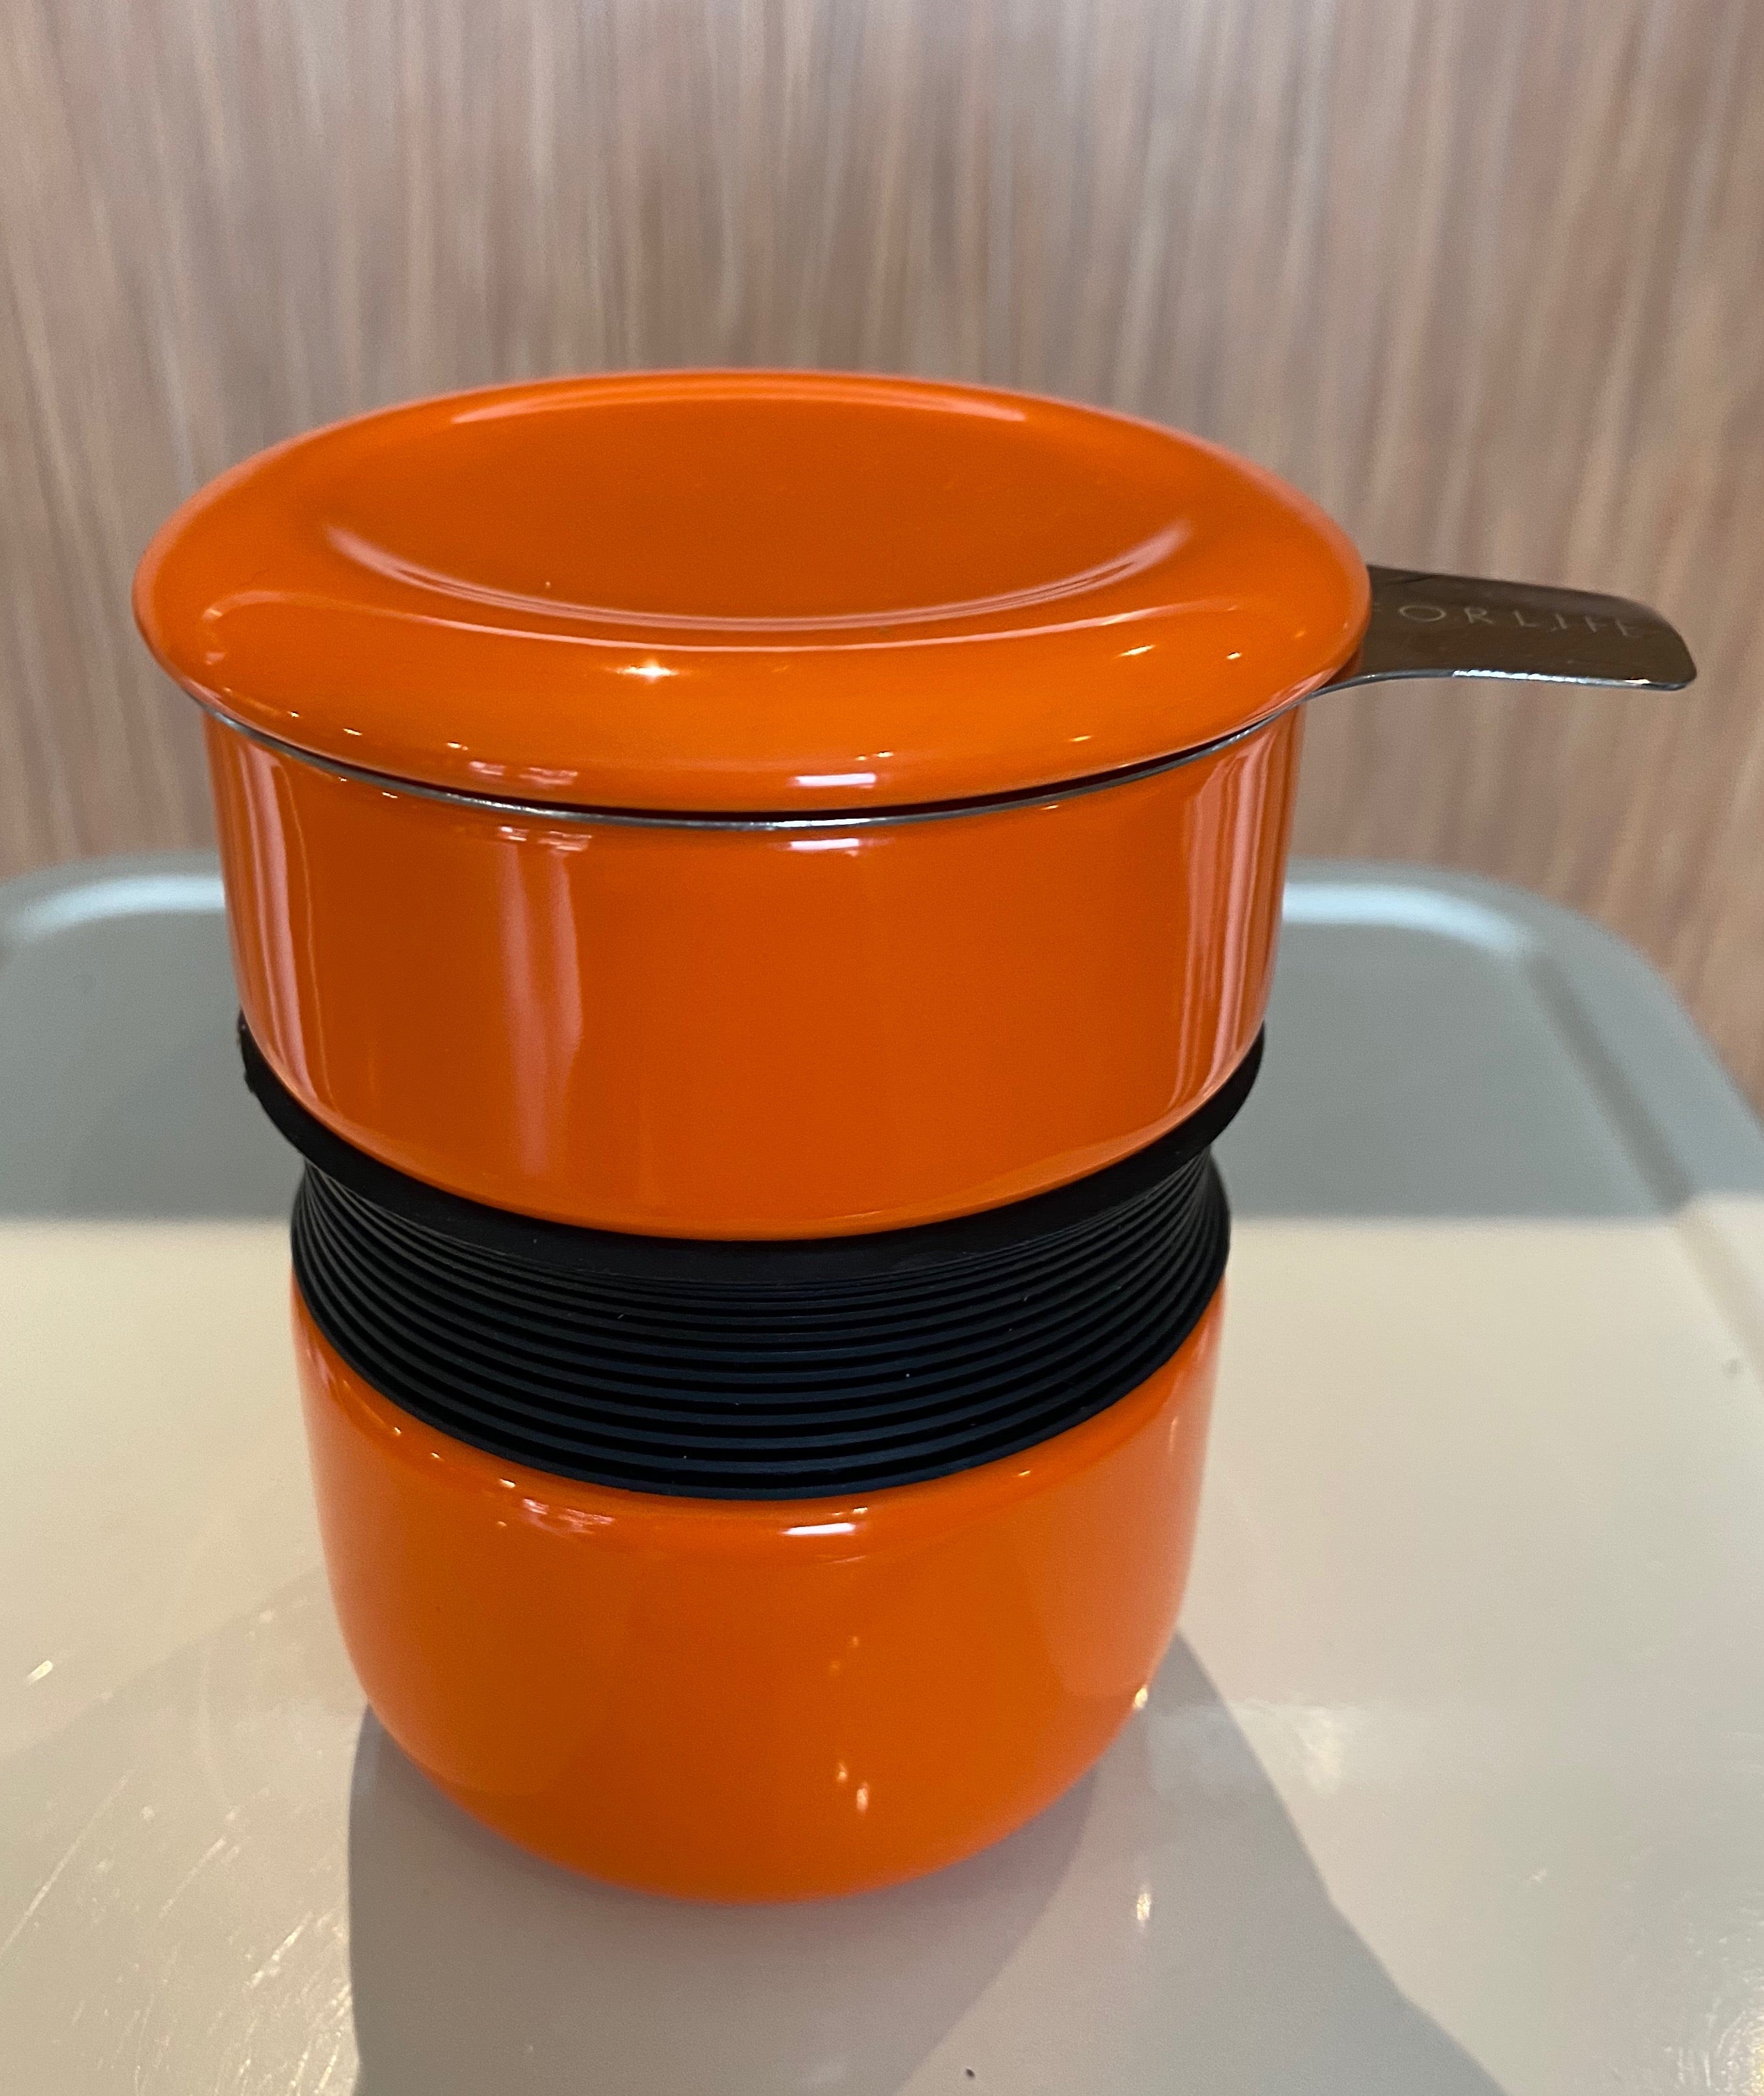 Carrot Asian style tea mug with infuser & lid, For Life brand